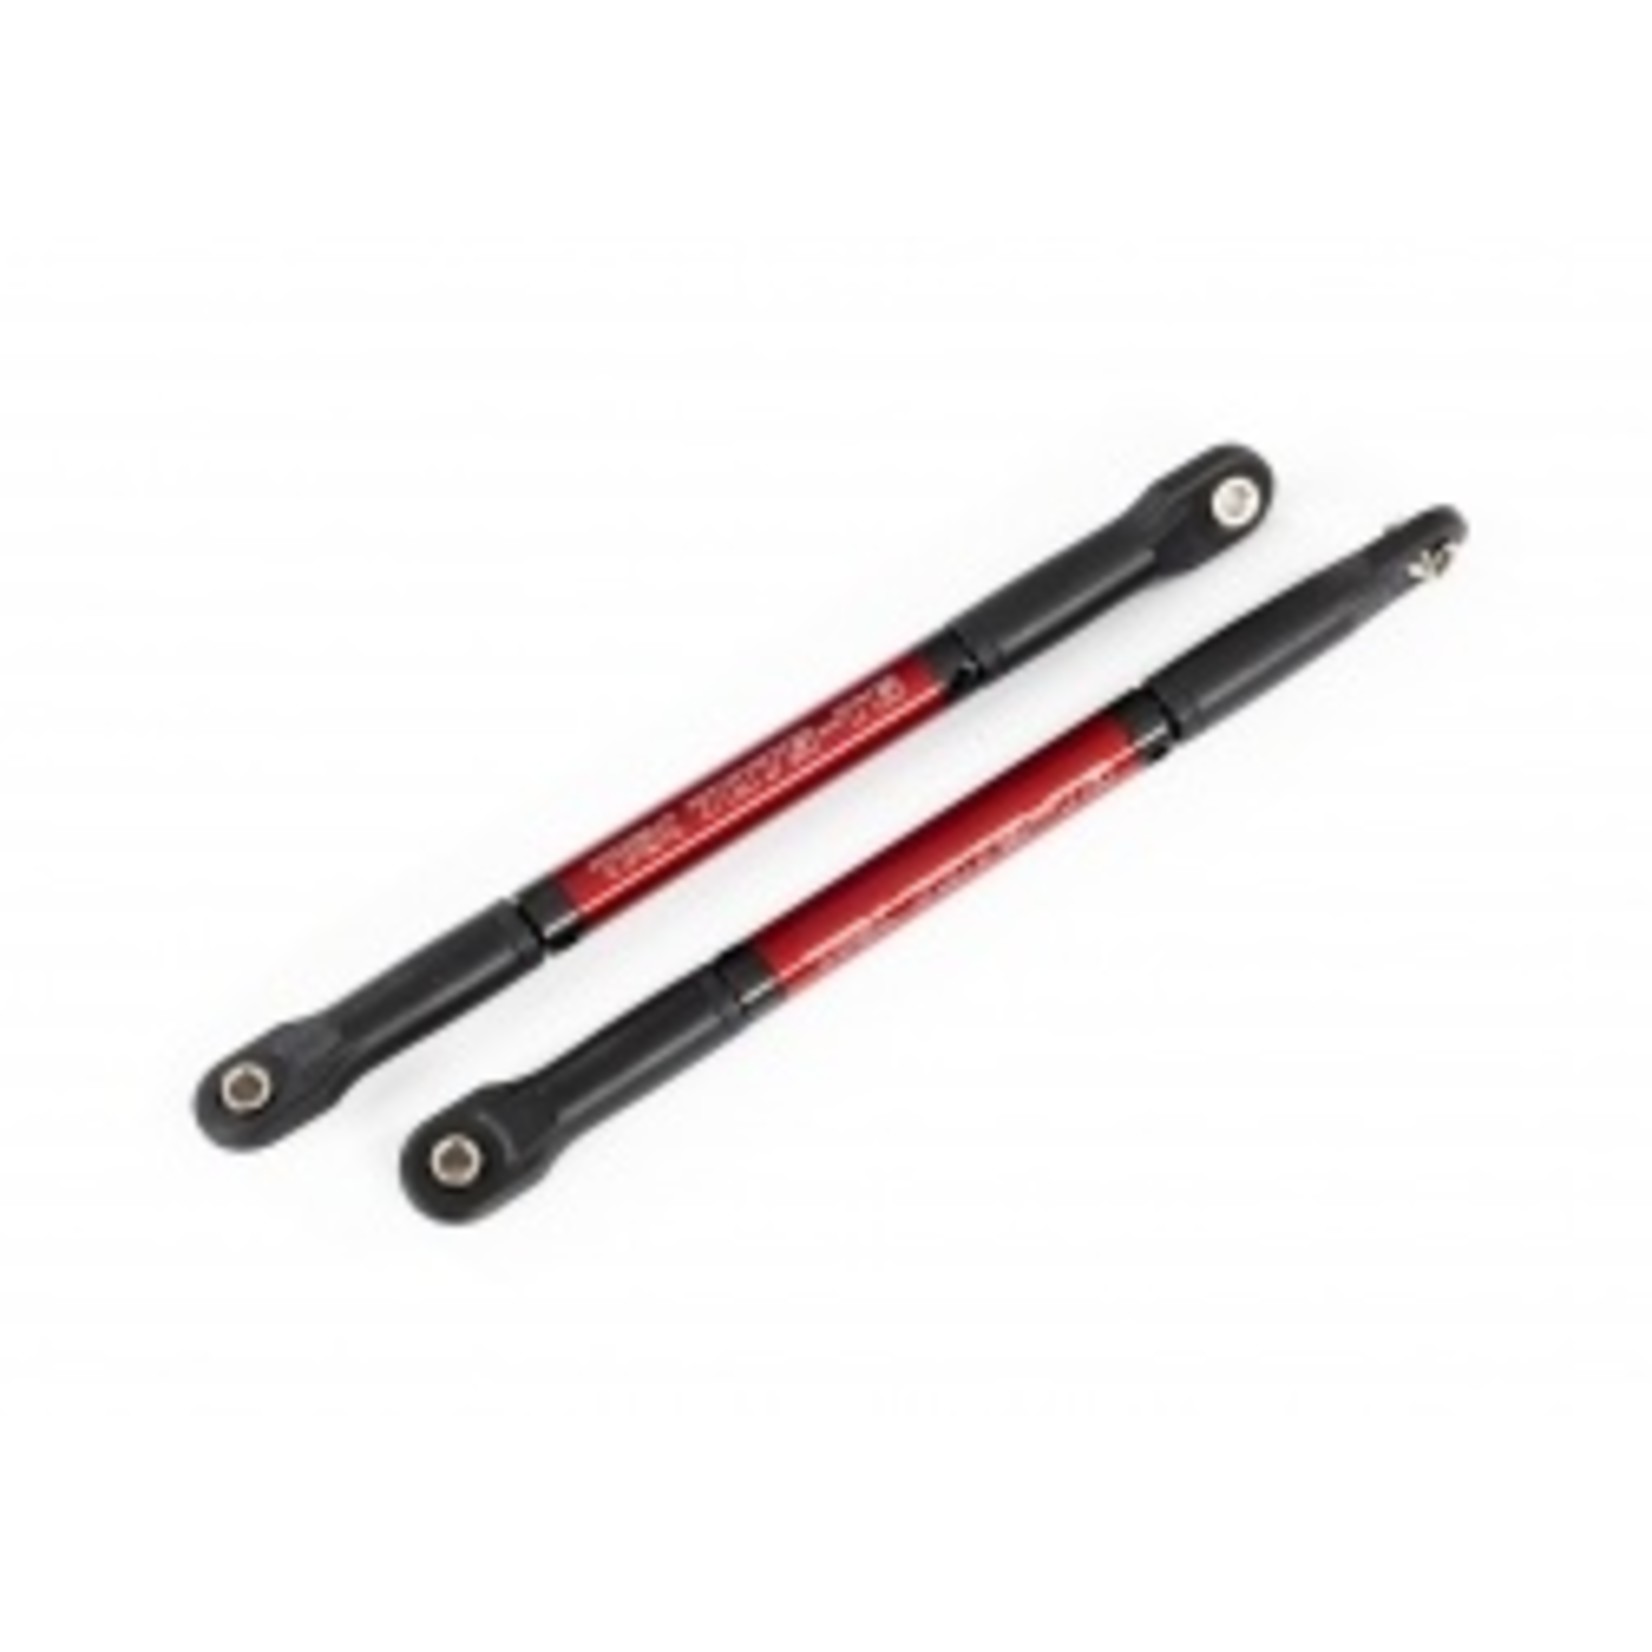 Traxxas Push rods, aluminum (red-anodized), heavy duty (2) (assembled with rod ends and threaded inserts)